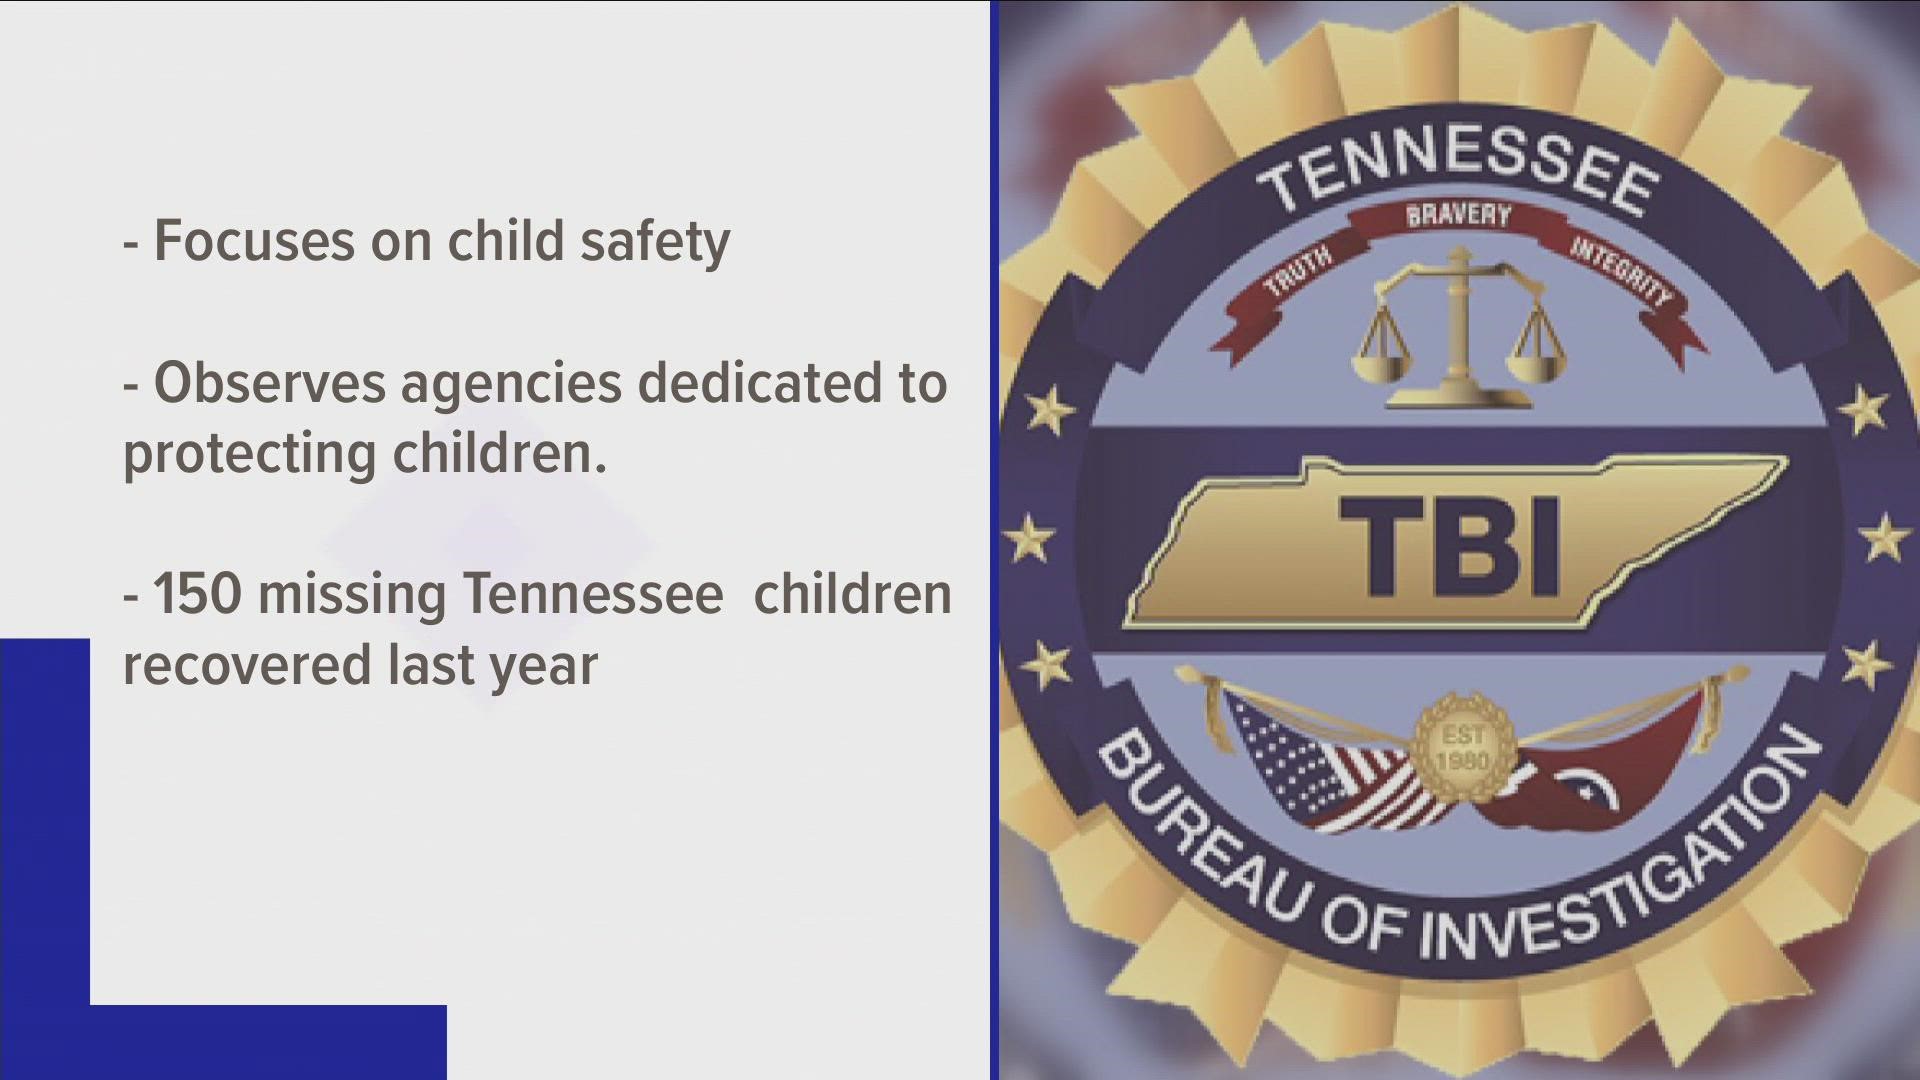 The TBI urged people to also take a look at the list of missing children in the state, browsing through photos and possibly sharing information about their location.